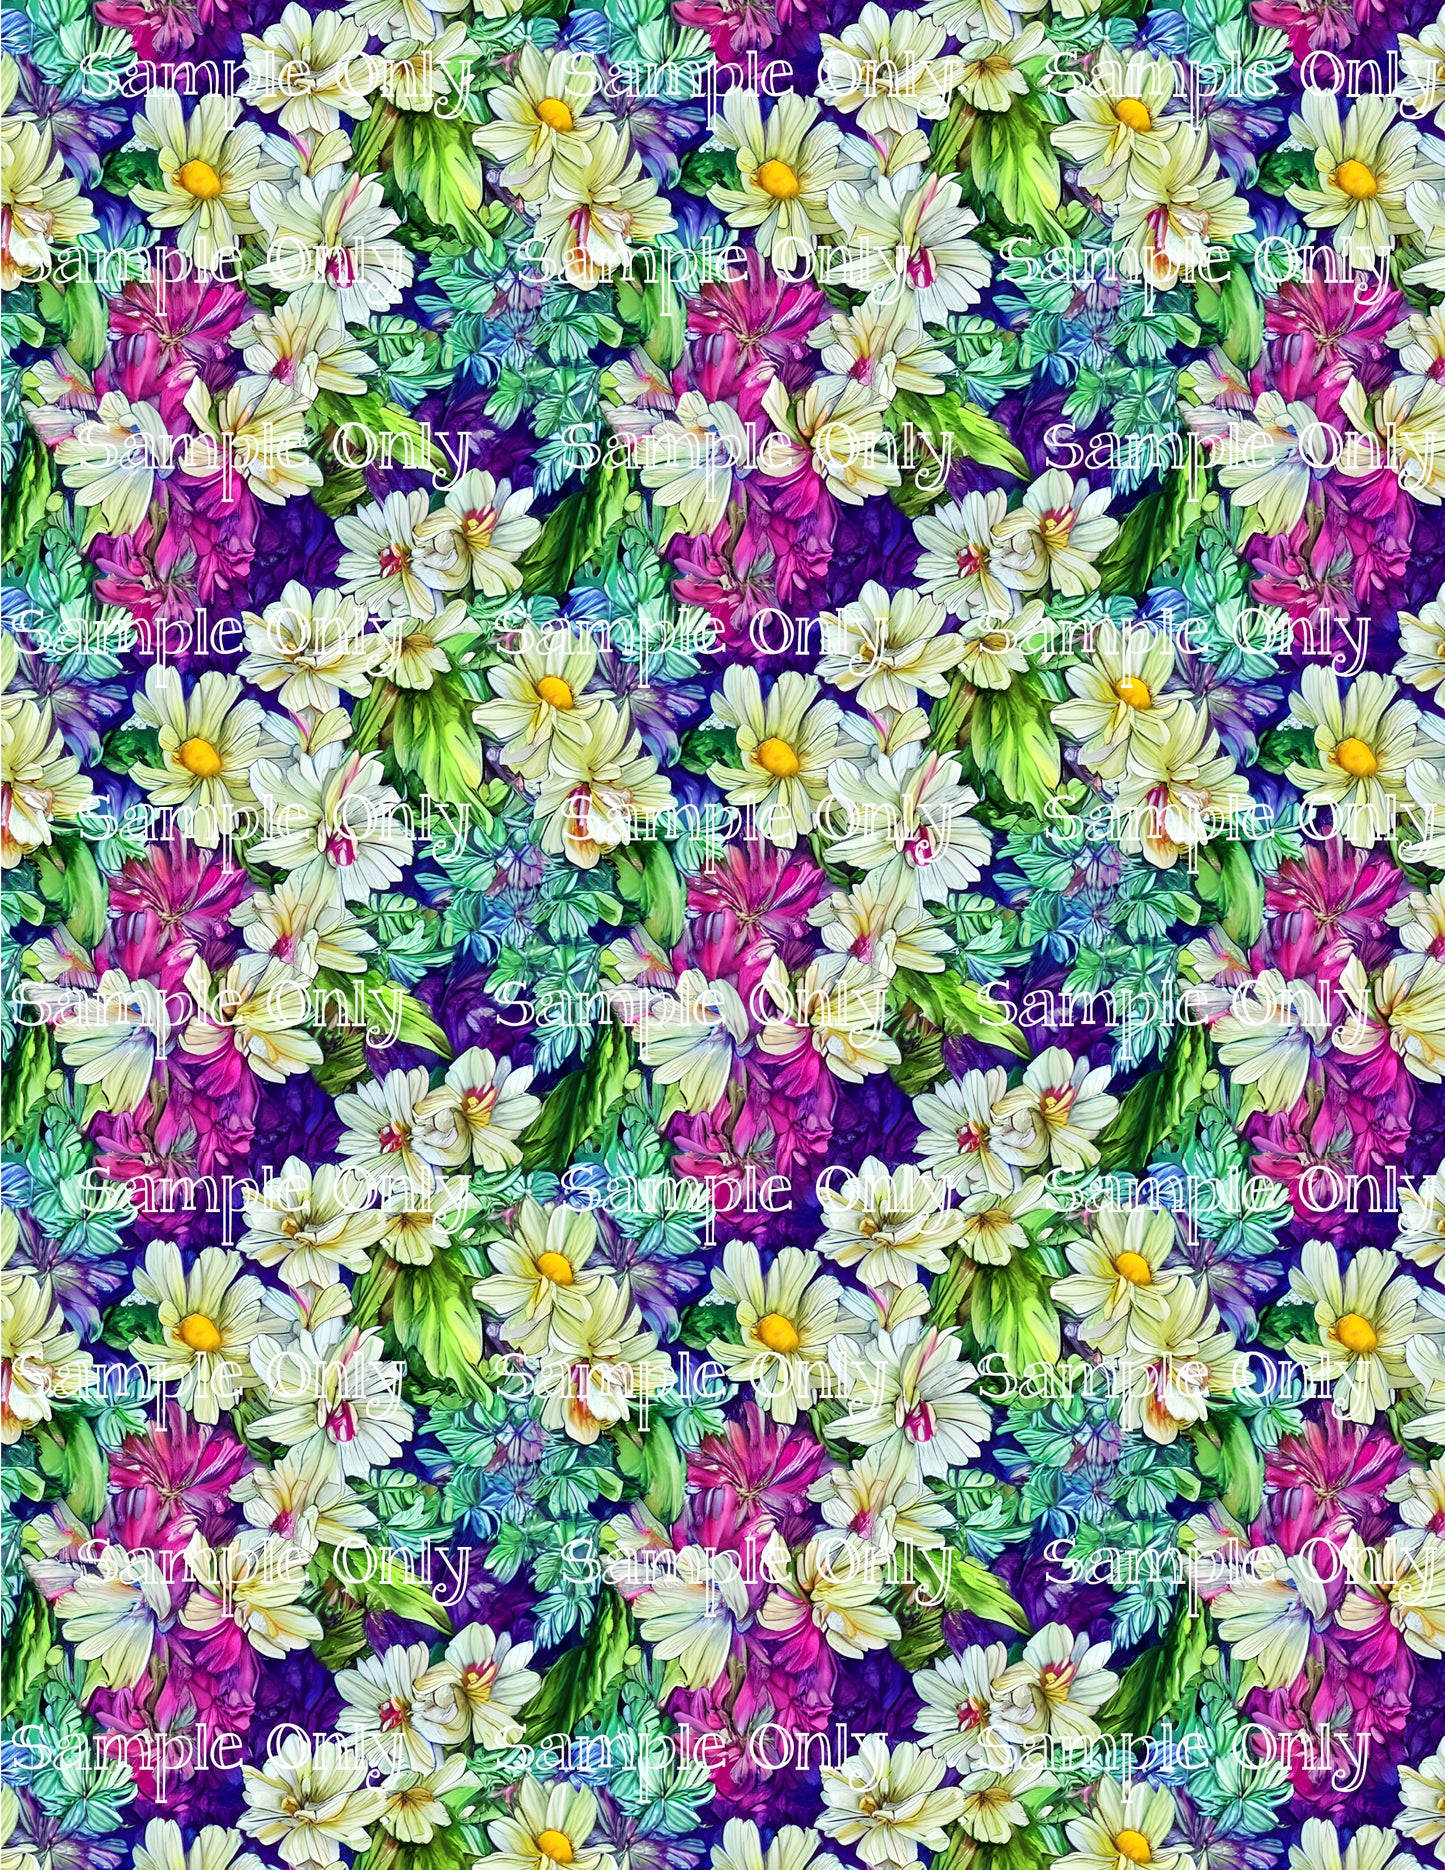 Impressionist Floral Flower Pattern Image Sheet For Polymer Clay Transfer Decal DIGITAL FILE OR PRINTED IFL33